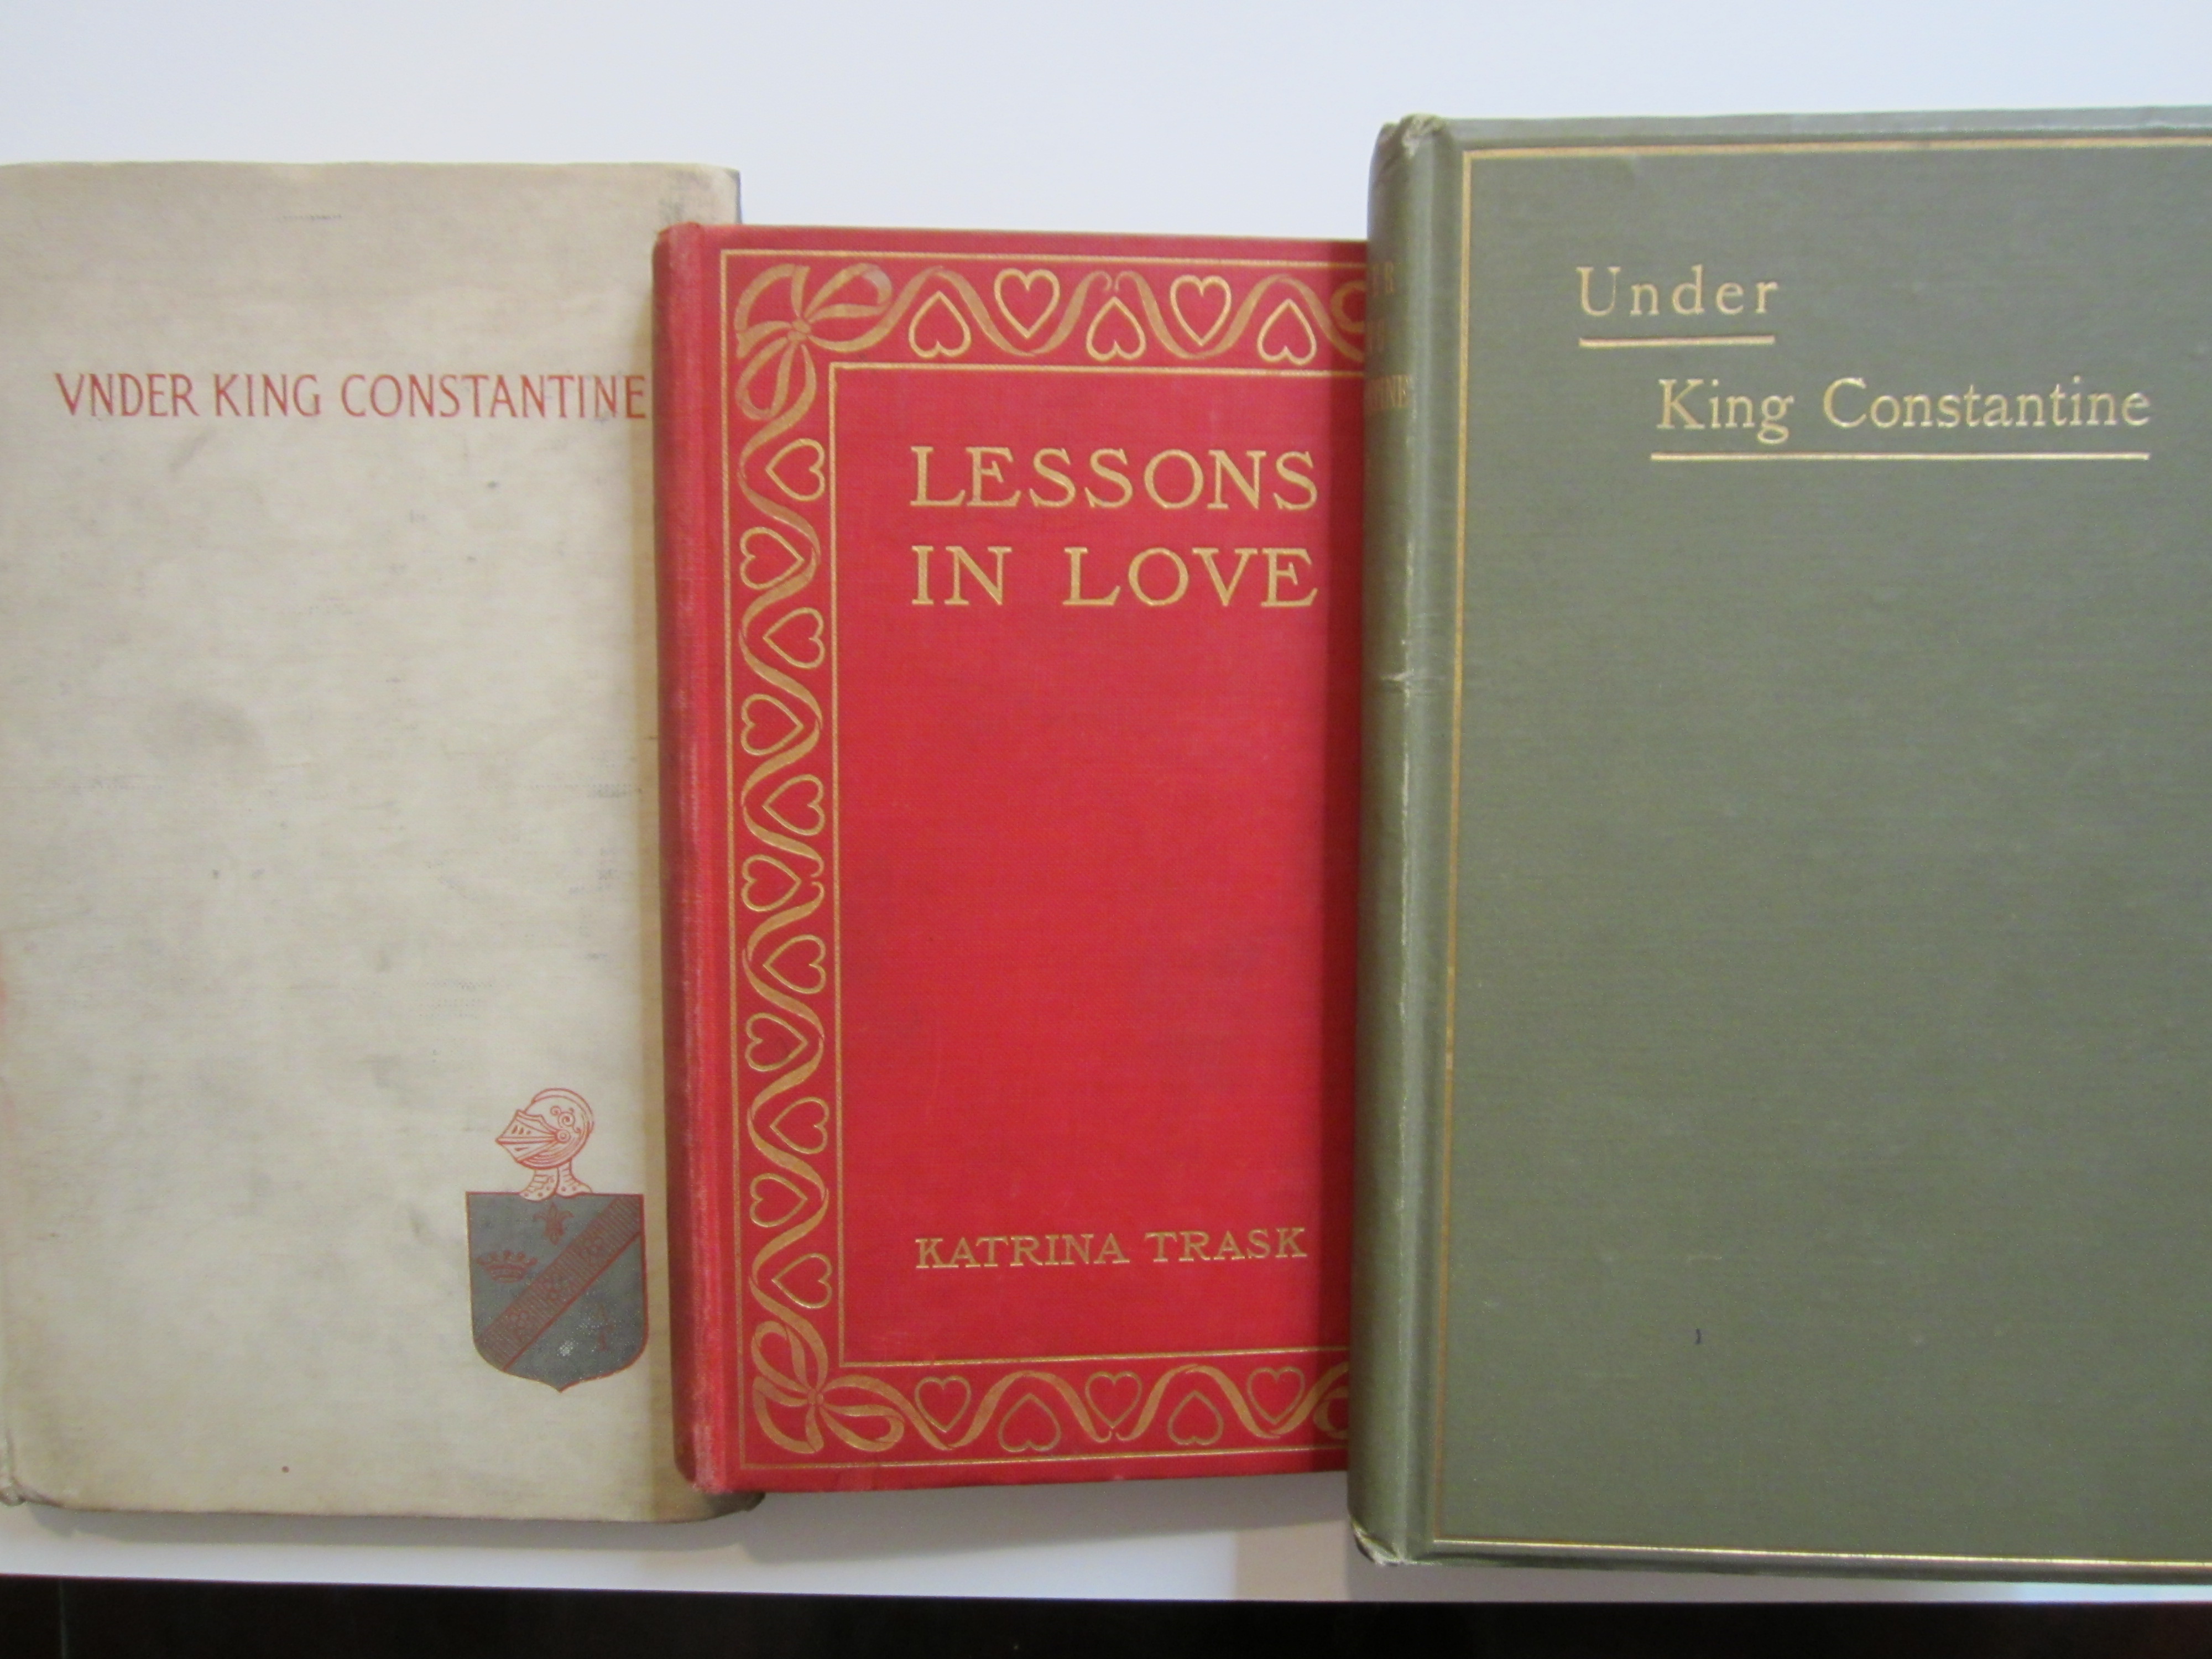 The Clifton Waller Barrett Library contains two of her books, Under King Constantine, published anonymously in 1892 and Lessons in Love.